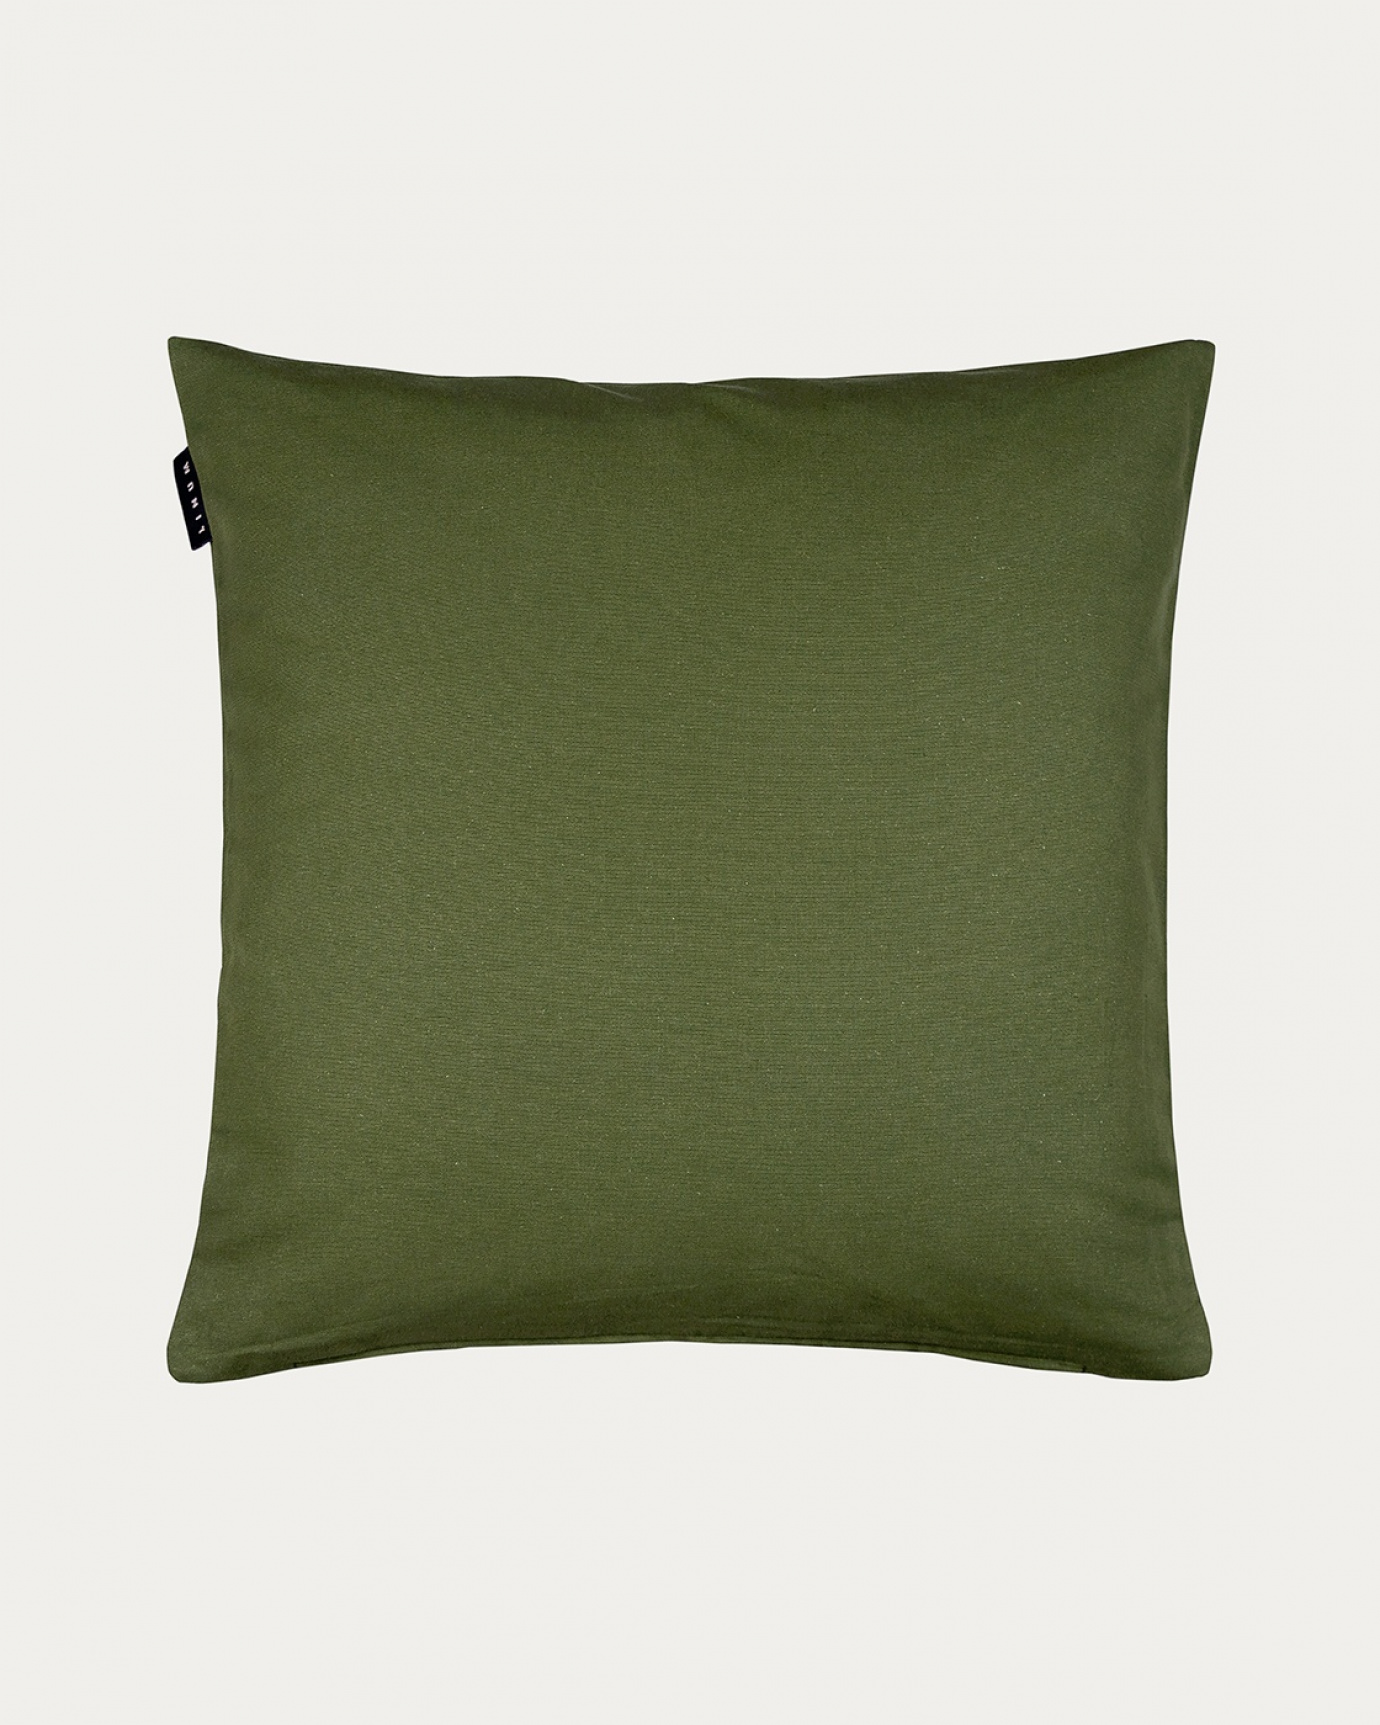 Product image dark olive green ANNABELL cushion cover made of soft cotton from LINUM DESIGN. Size 50x50 cm.